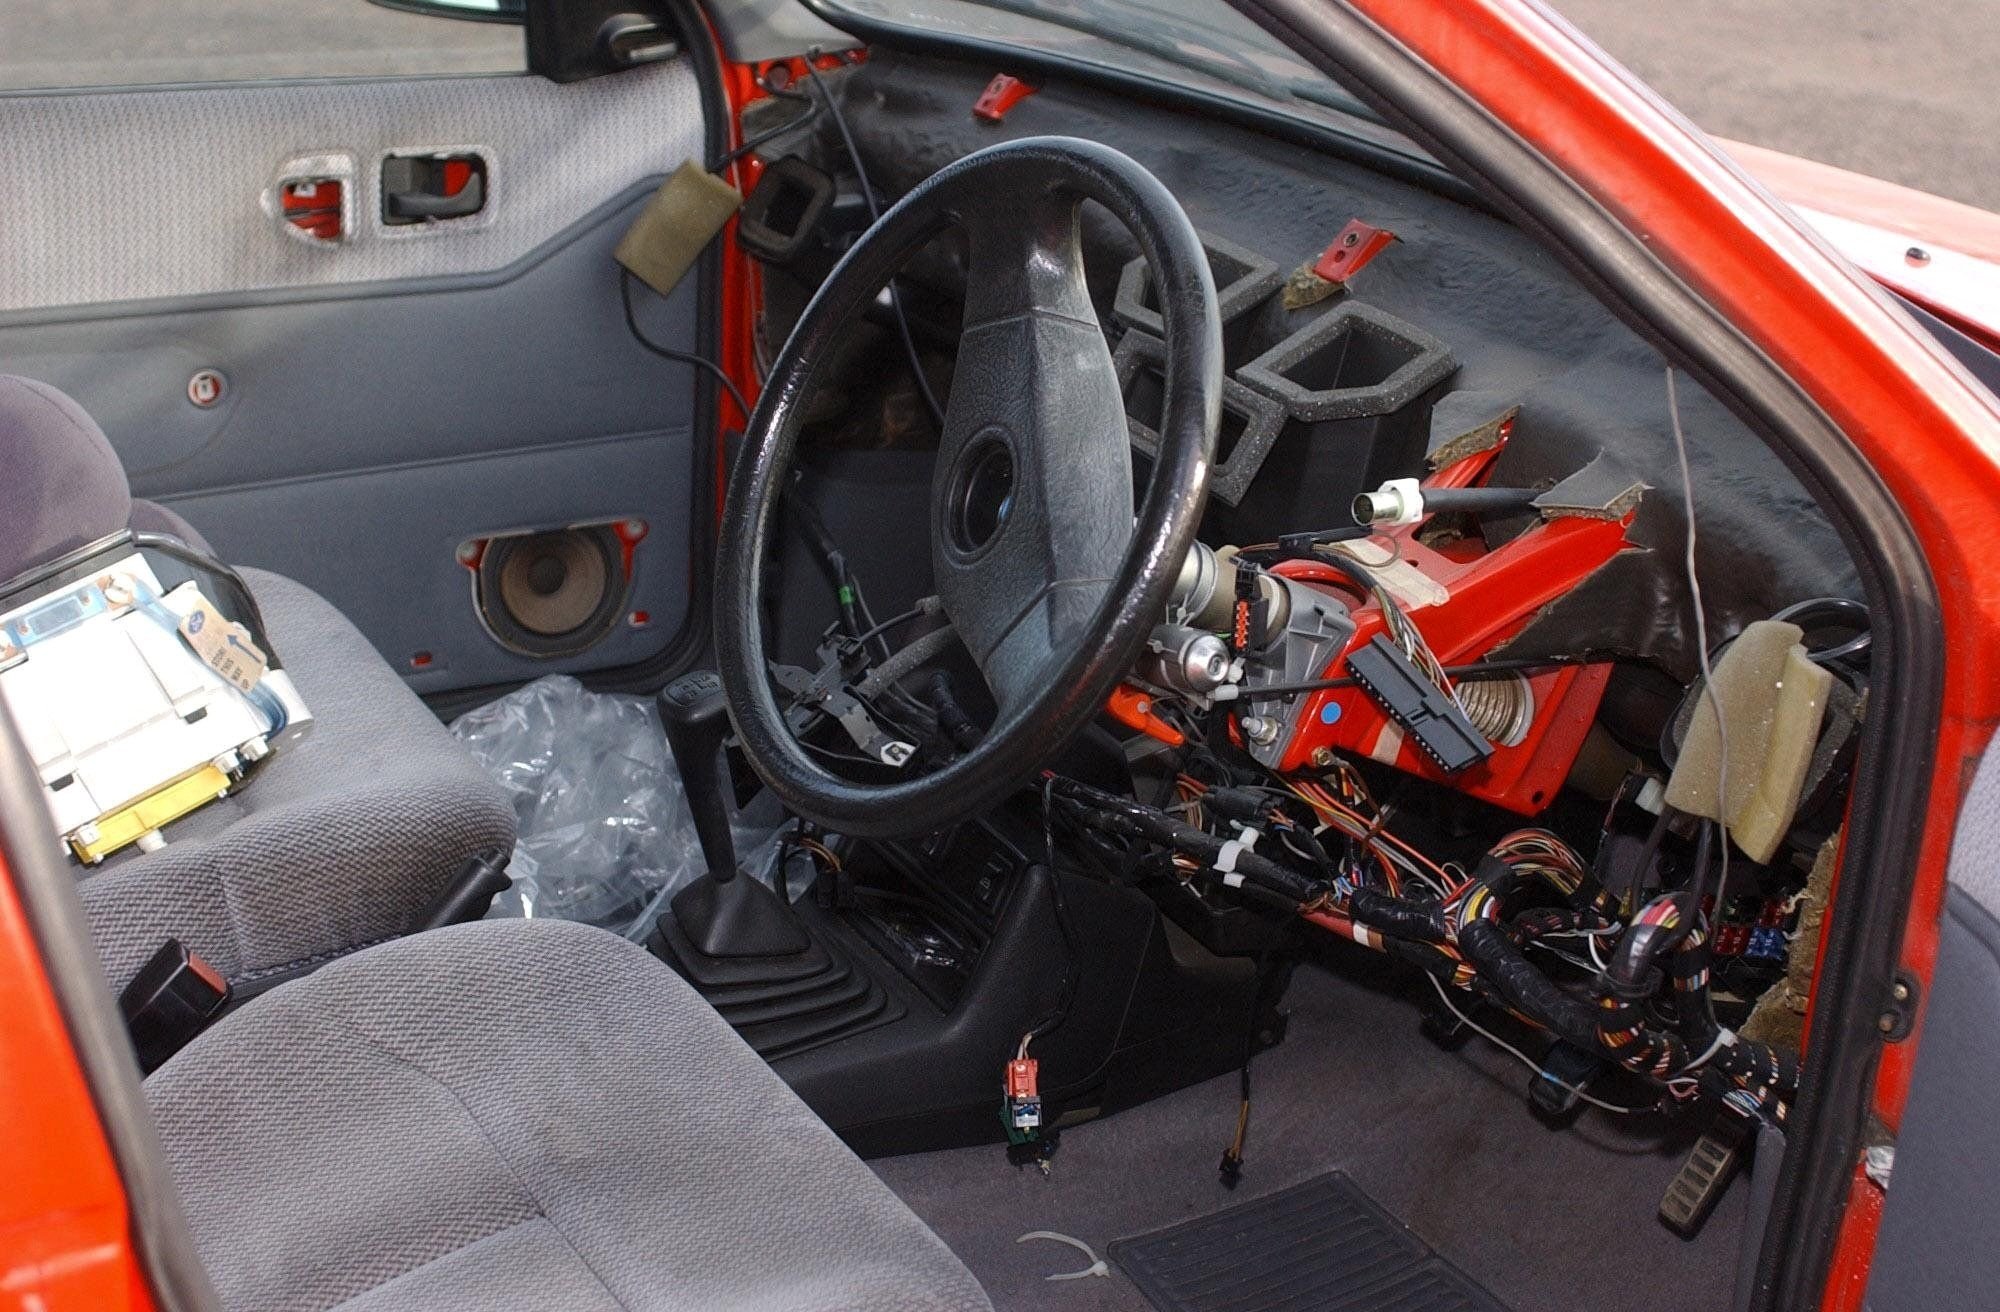 The inside of Ian Huntley’s car after examination by forensic experts